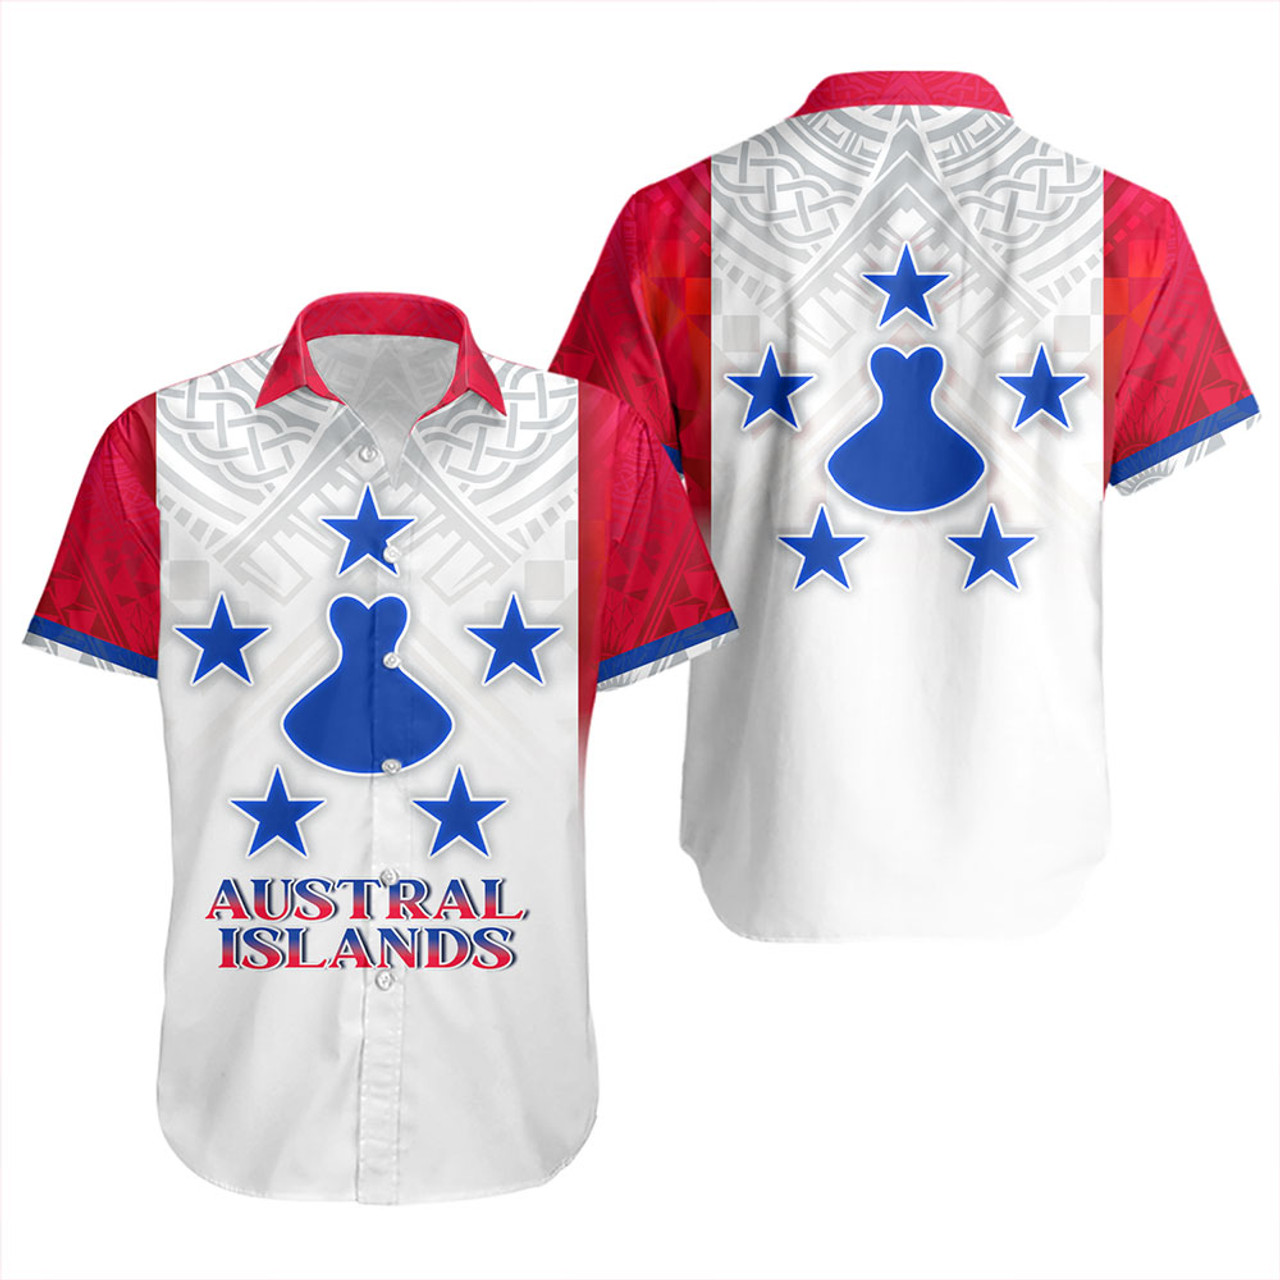 Austral Islands Short Sleeve Shirt Flag Color With Traditional Patterns